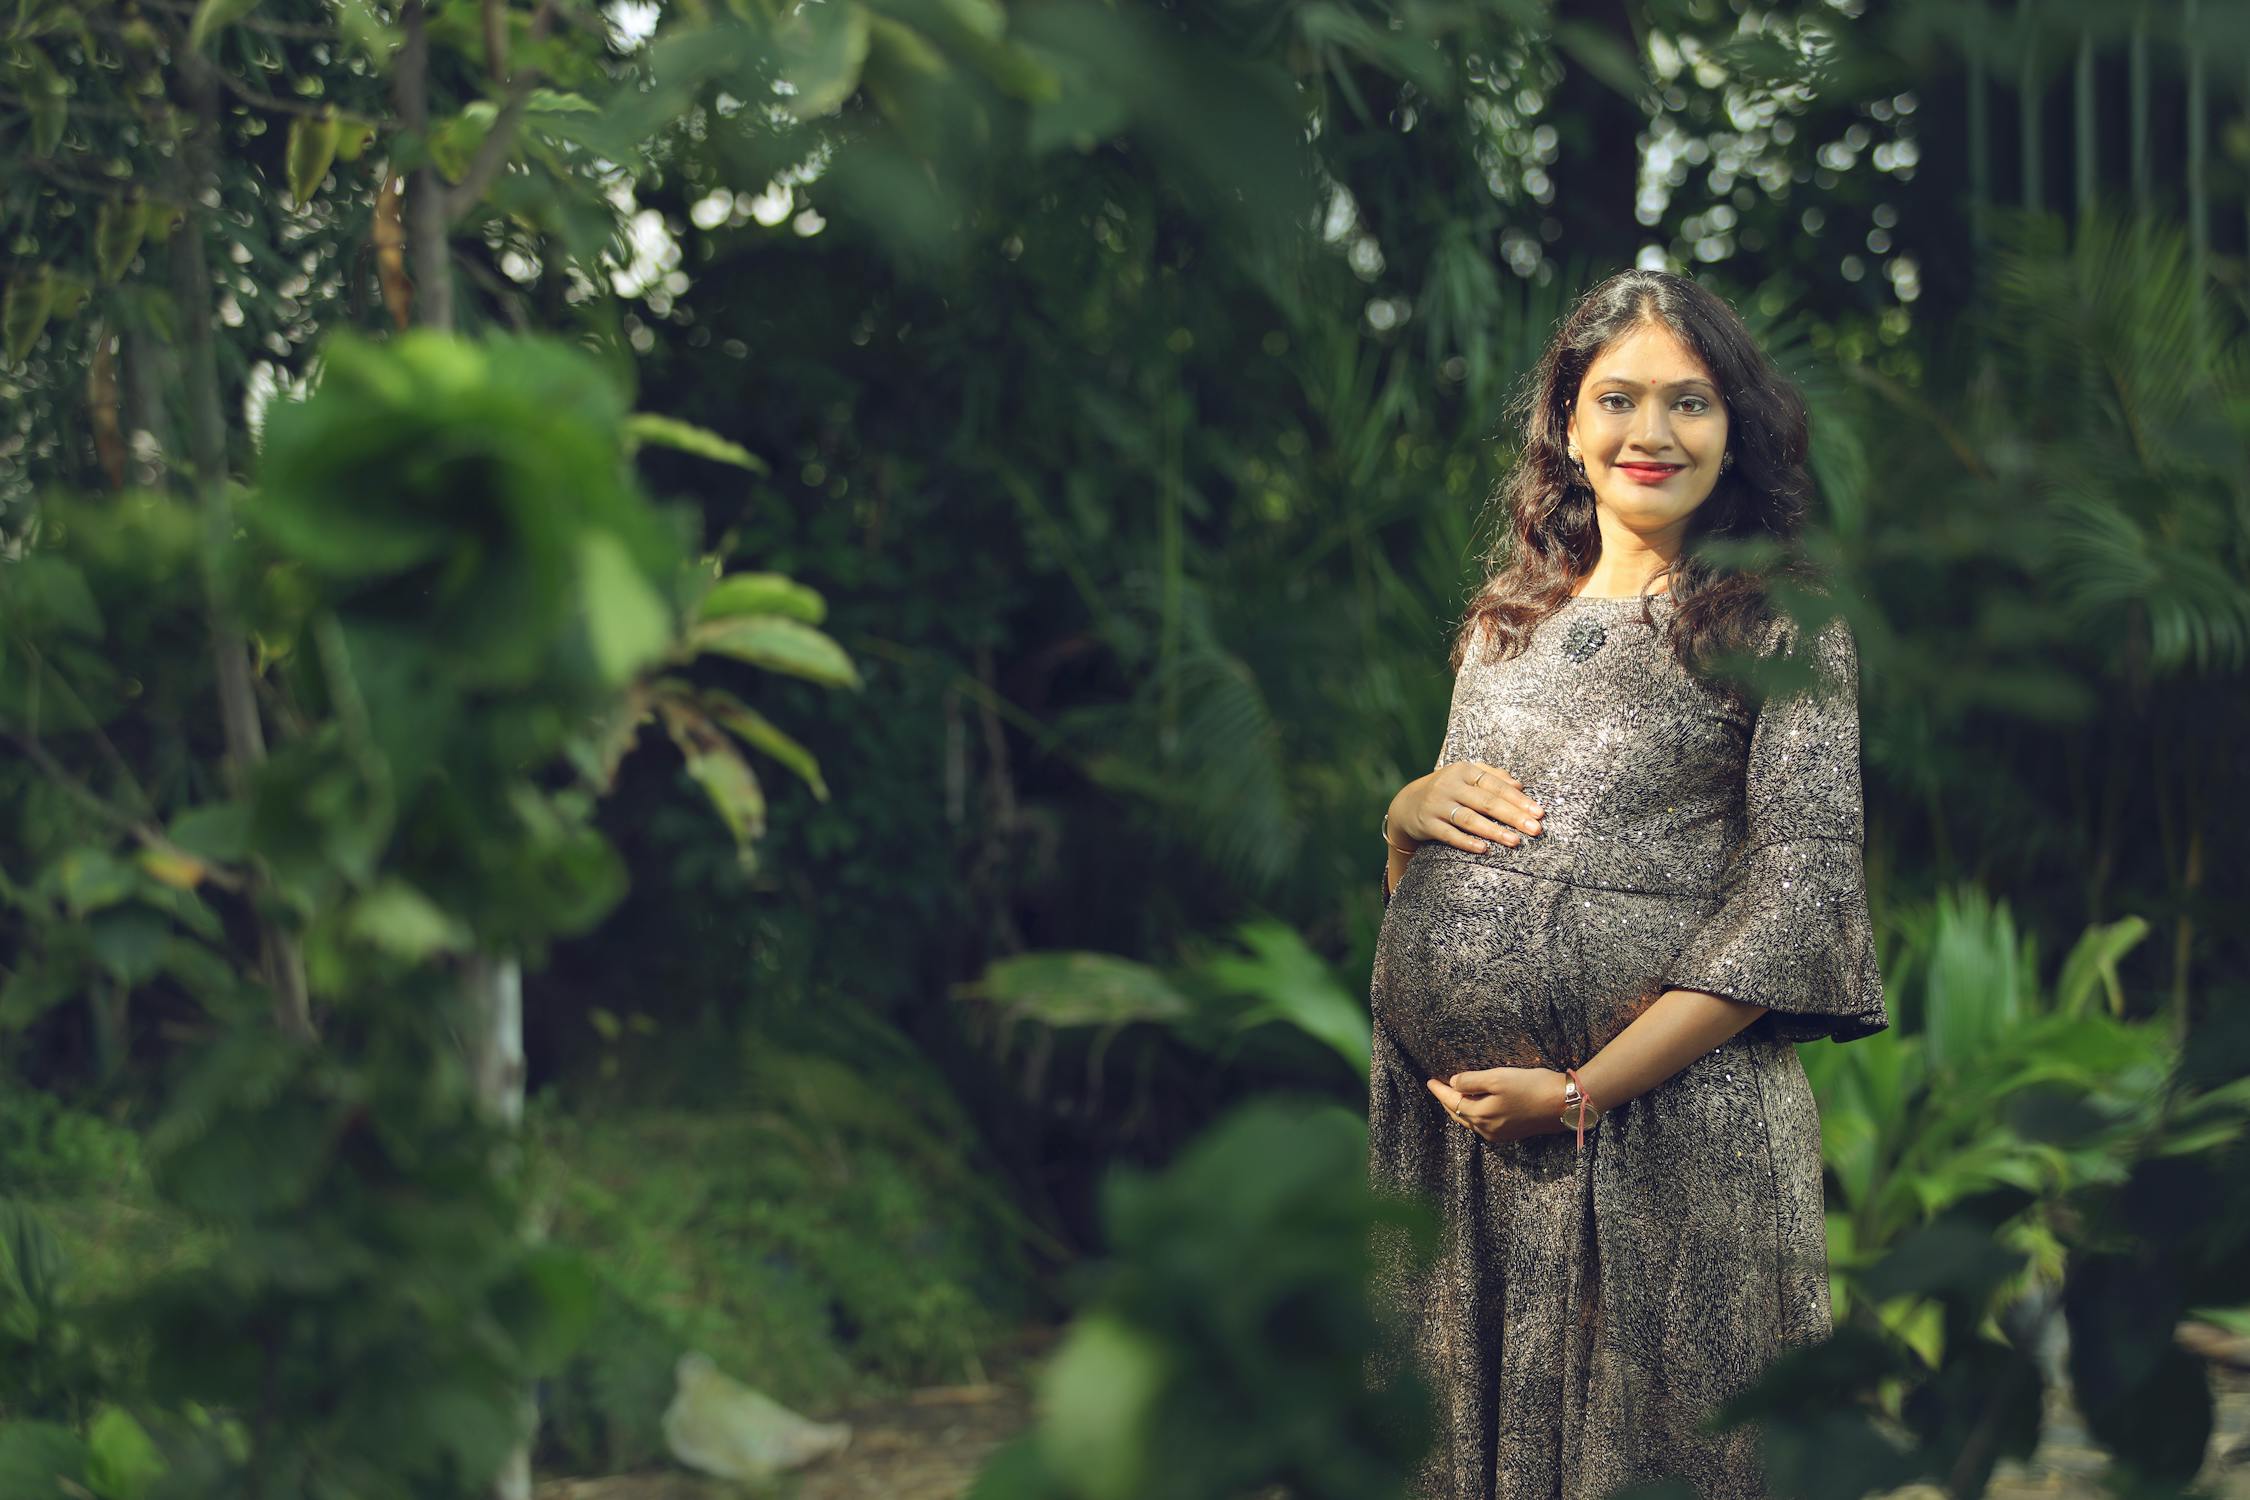 Pregnant Indian Photo by Ashwin Shrigiri from Pexels: https://www.pexels.com/photo/pregnant-woman-holding-her-baby-bump-while-looking-at-the-camera-7522678/